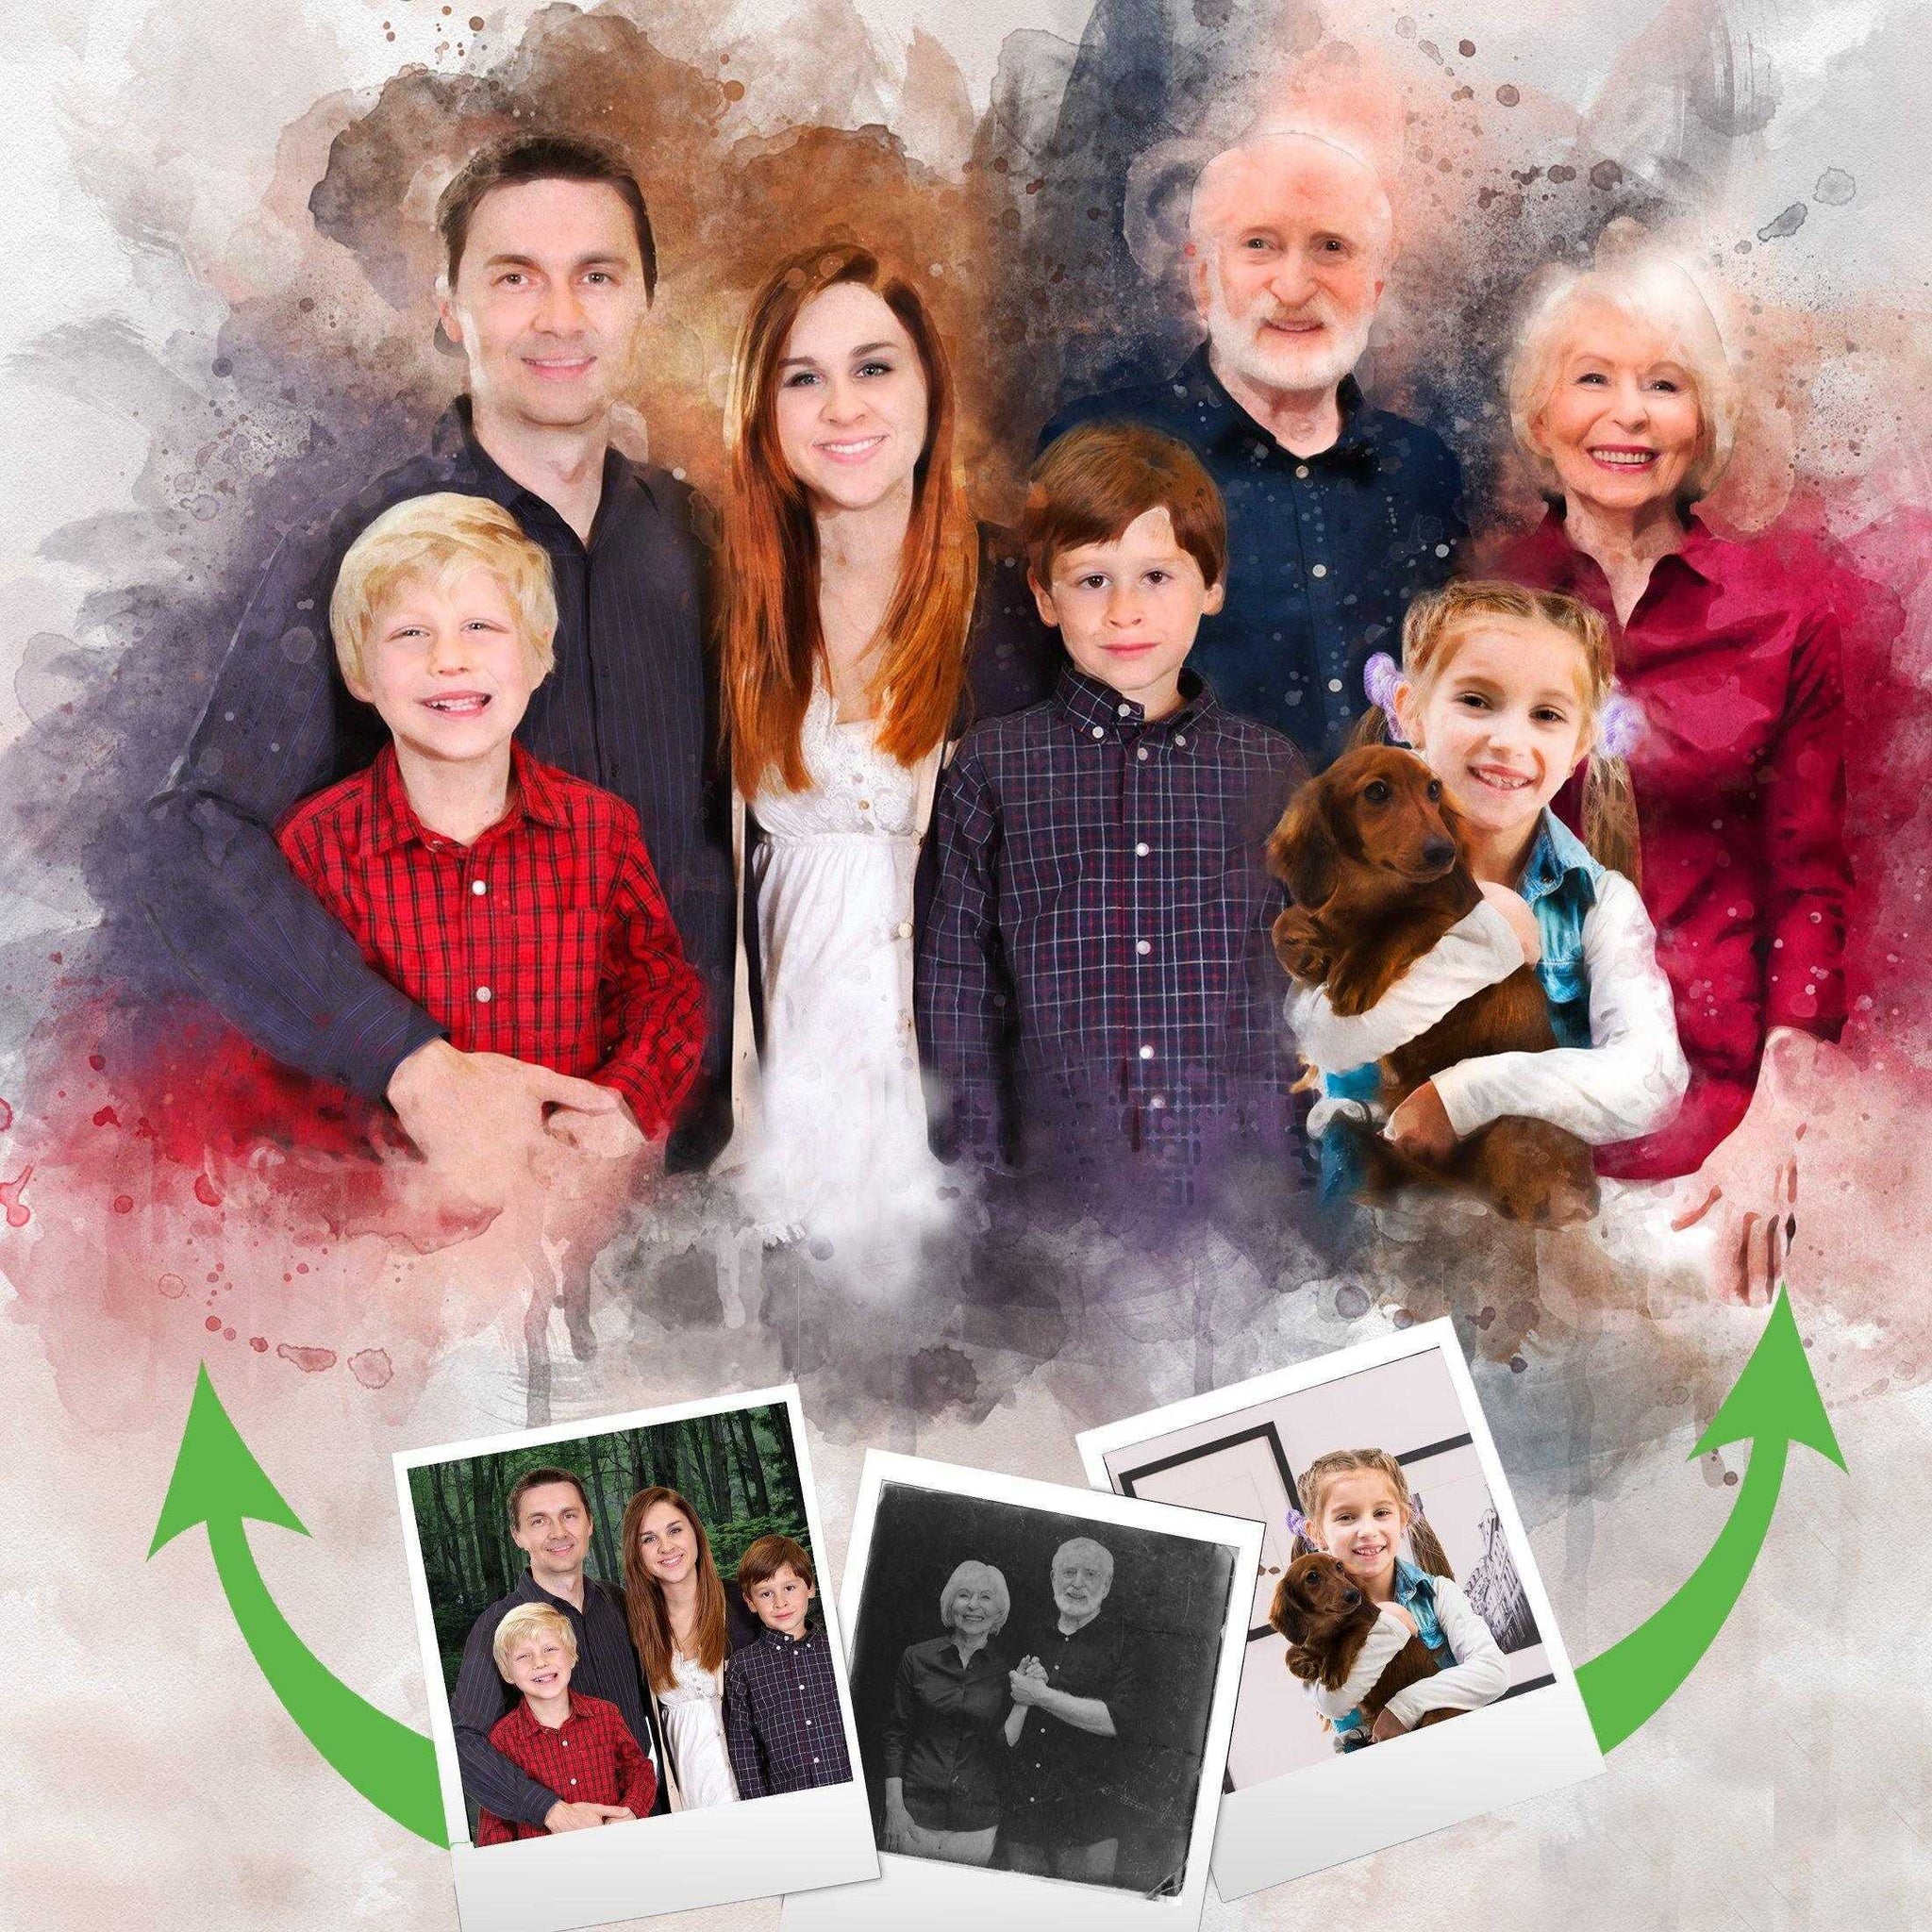 🌈 Add Deceased Loved One to Photo, Painting of Deceased Loved one with Family - FromPicToArt